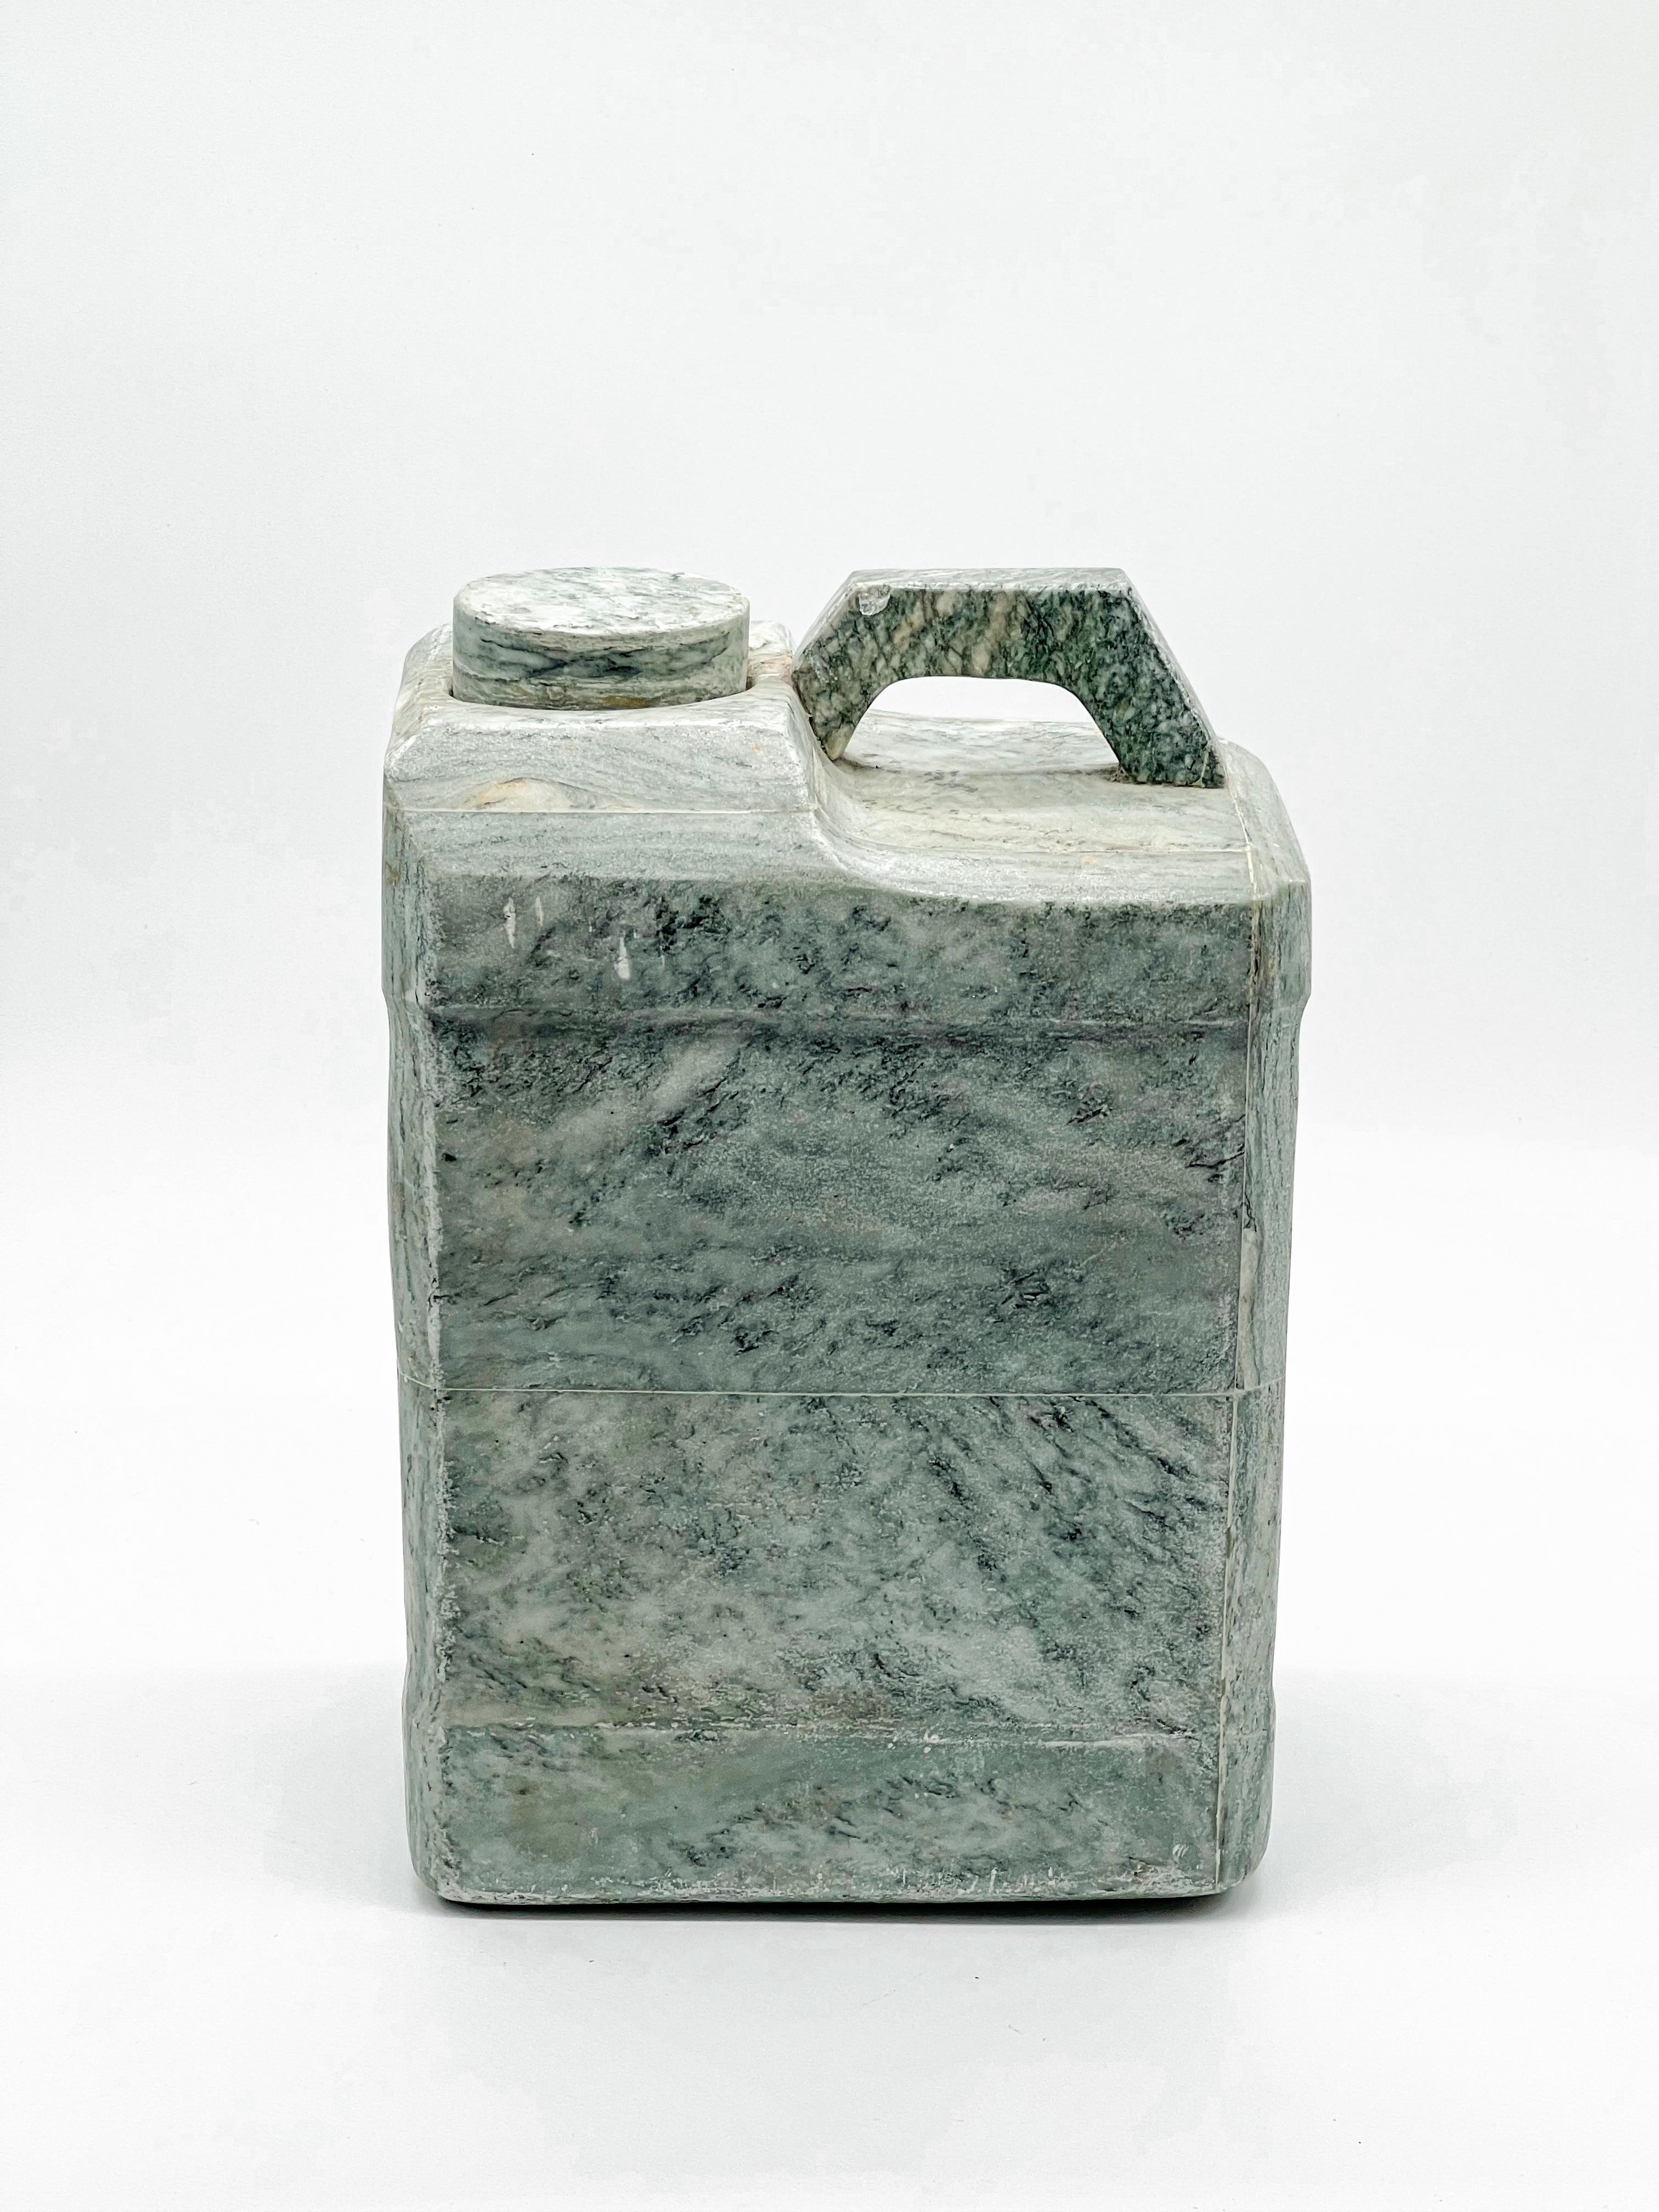 Decorative Marble Sculpture - Marble Fuel Tank - Collectible Interior Art

Offered for sale is an uncommon and possibly unique piece of decorative art: a functional fuel tank in plastic, entirely clad in light green marble (Antigua Green Marble).